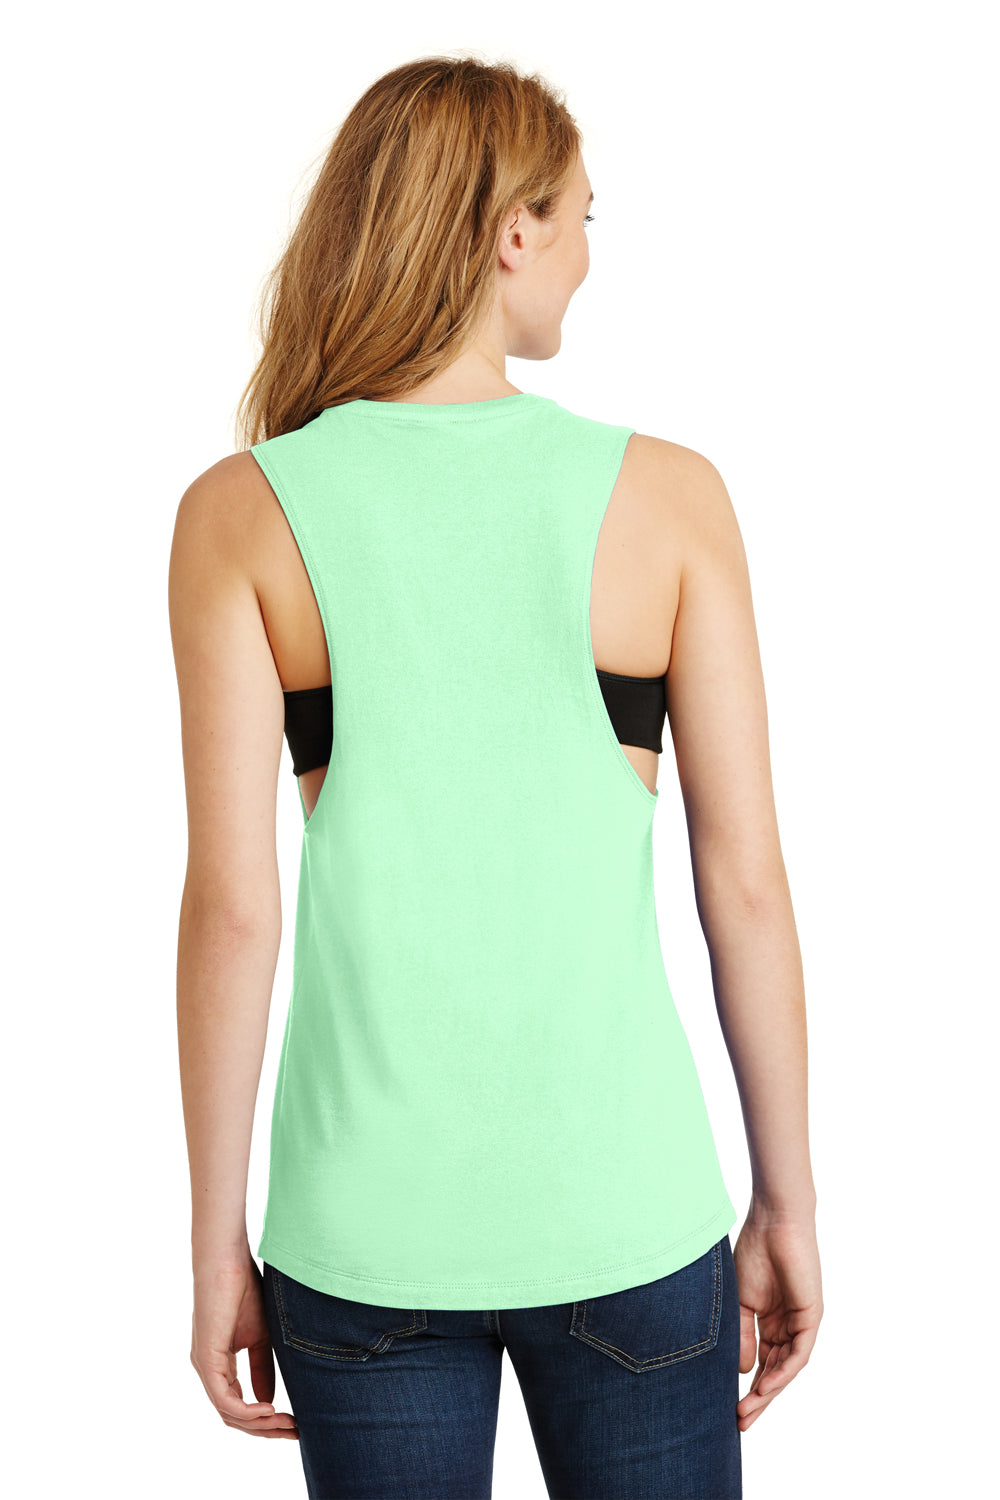 District DT6301 Womens Very Important Festival Tank Top Mint Green Back